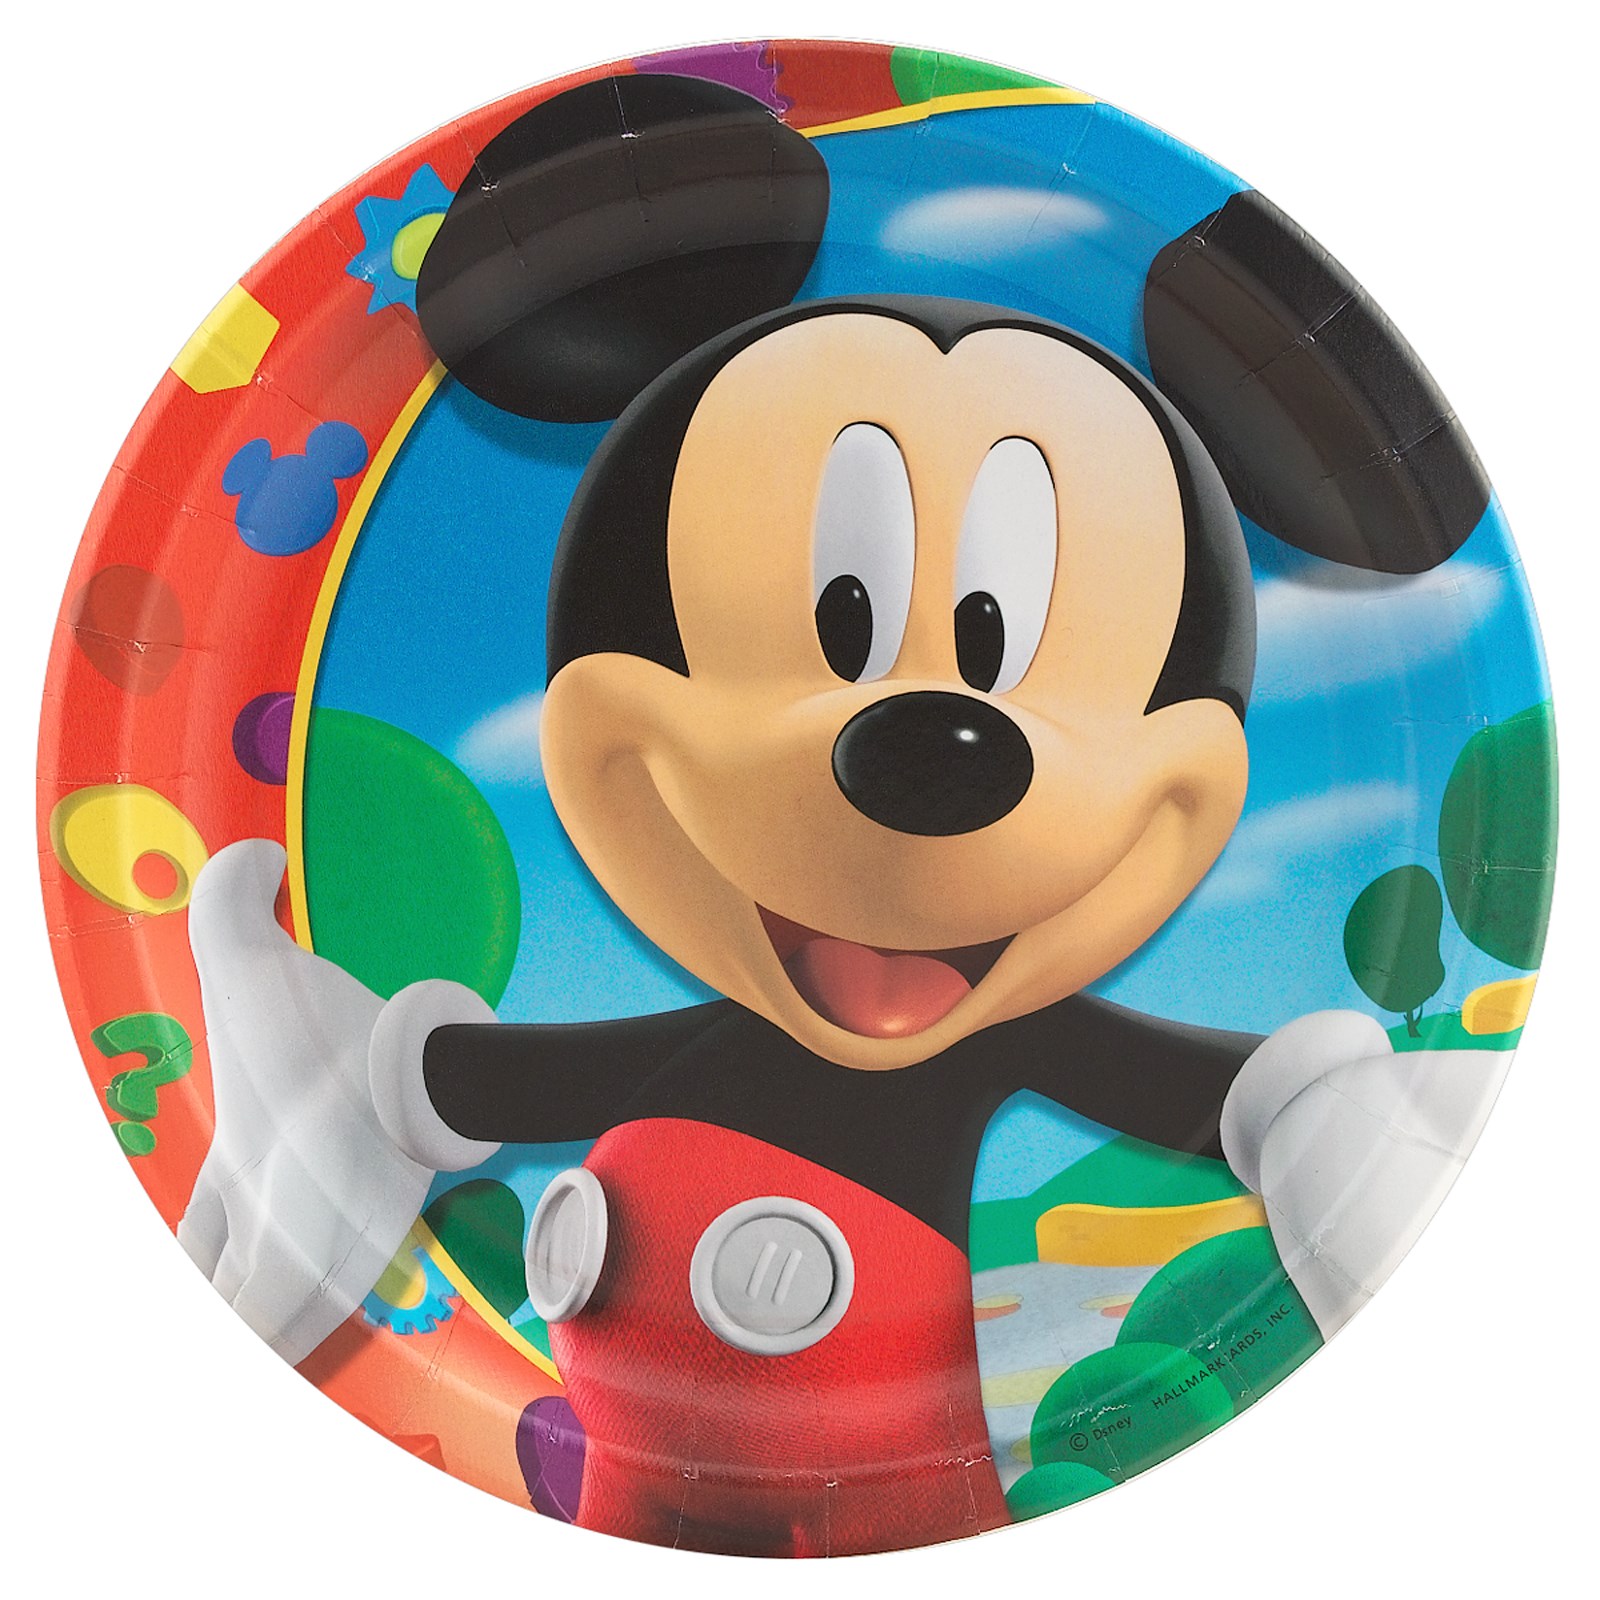 Mickey's Clubhouse 9-inch Dinner Plates (8 count)